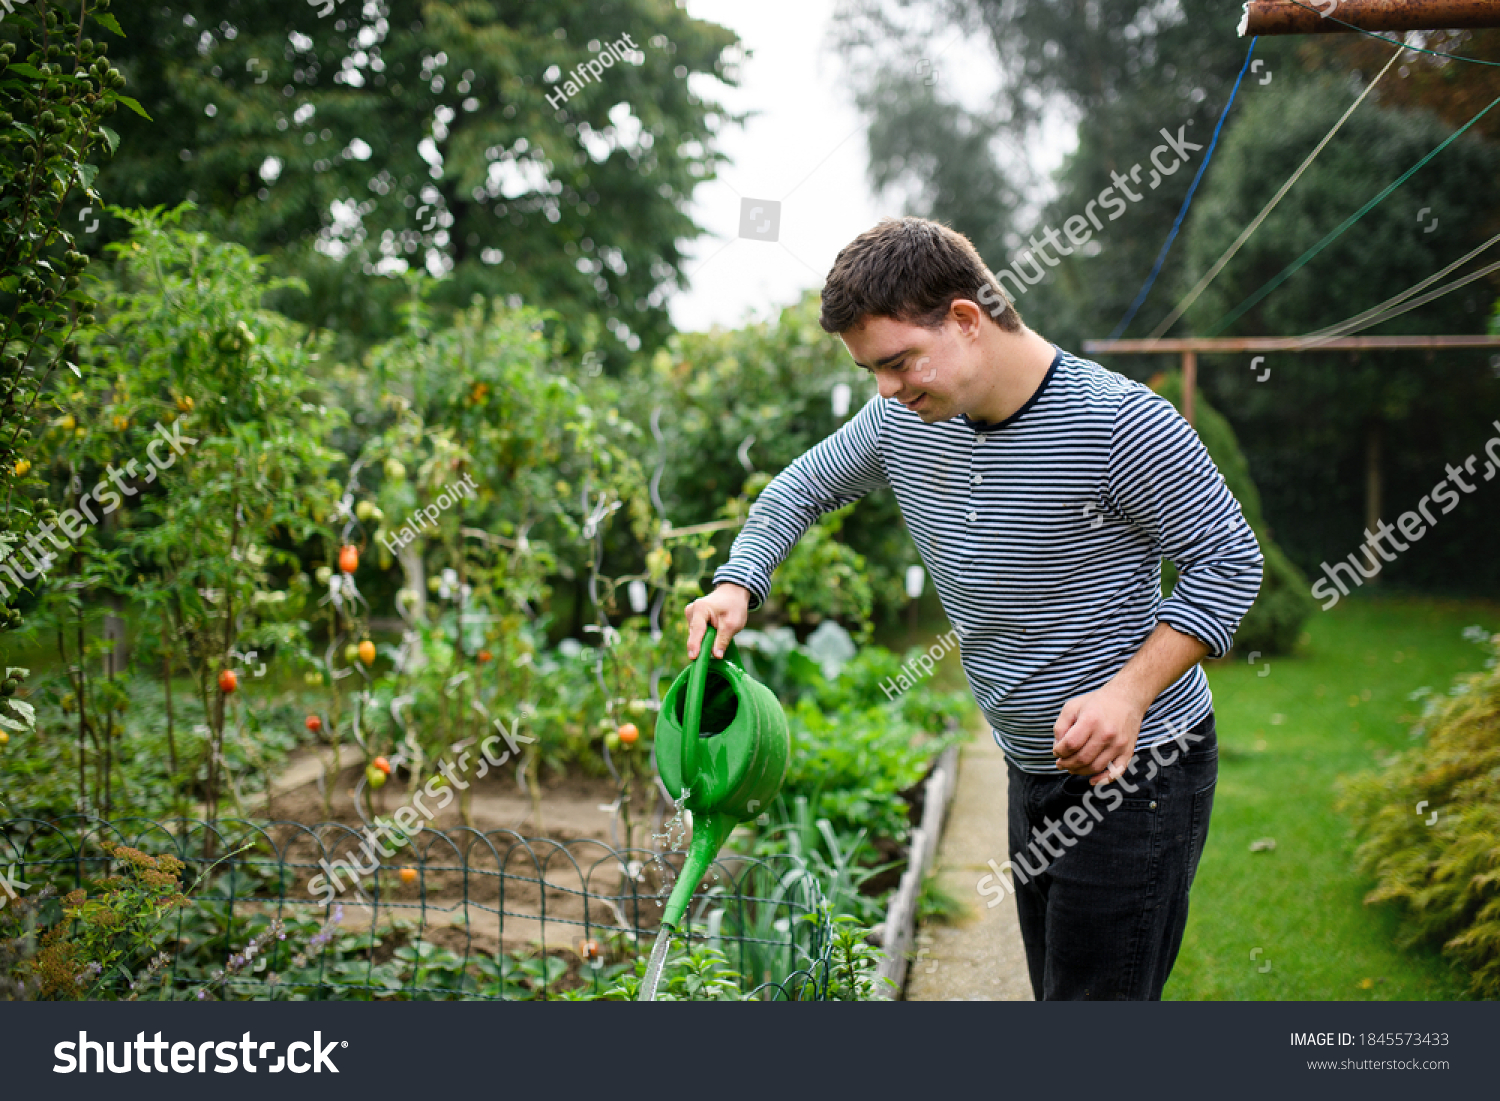 Down syndrome adult man watering plants outdoors in vegetable garden, gardening concept. #1845573433